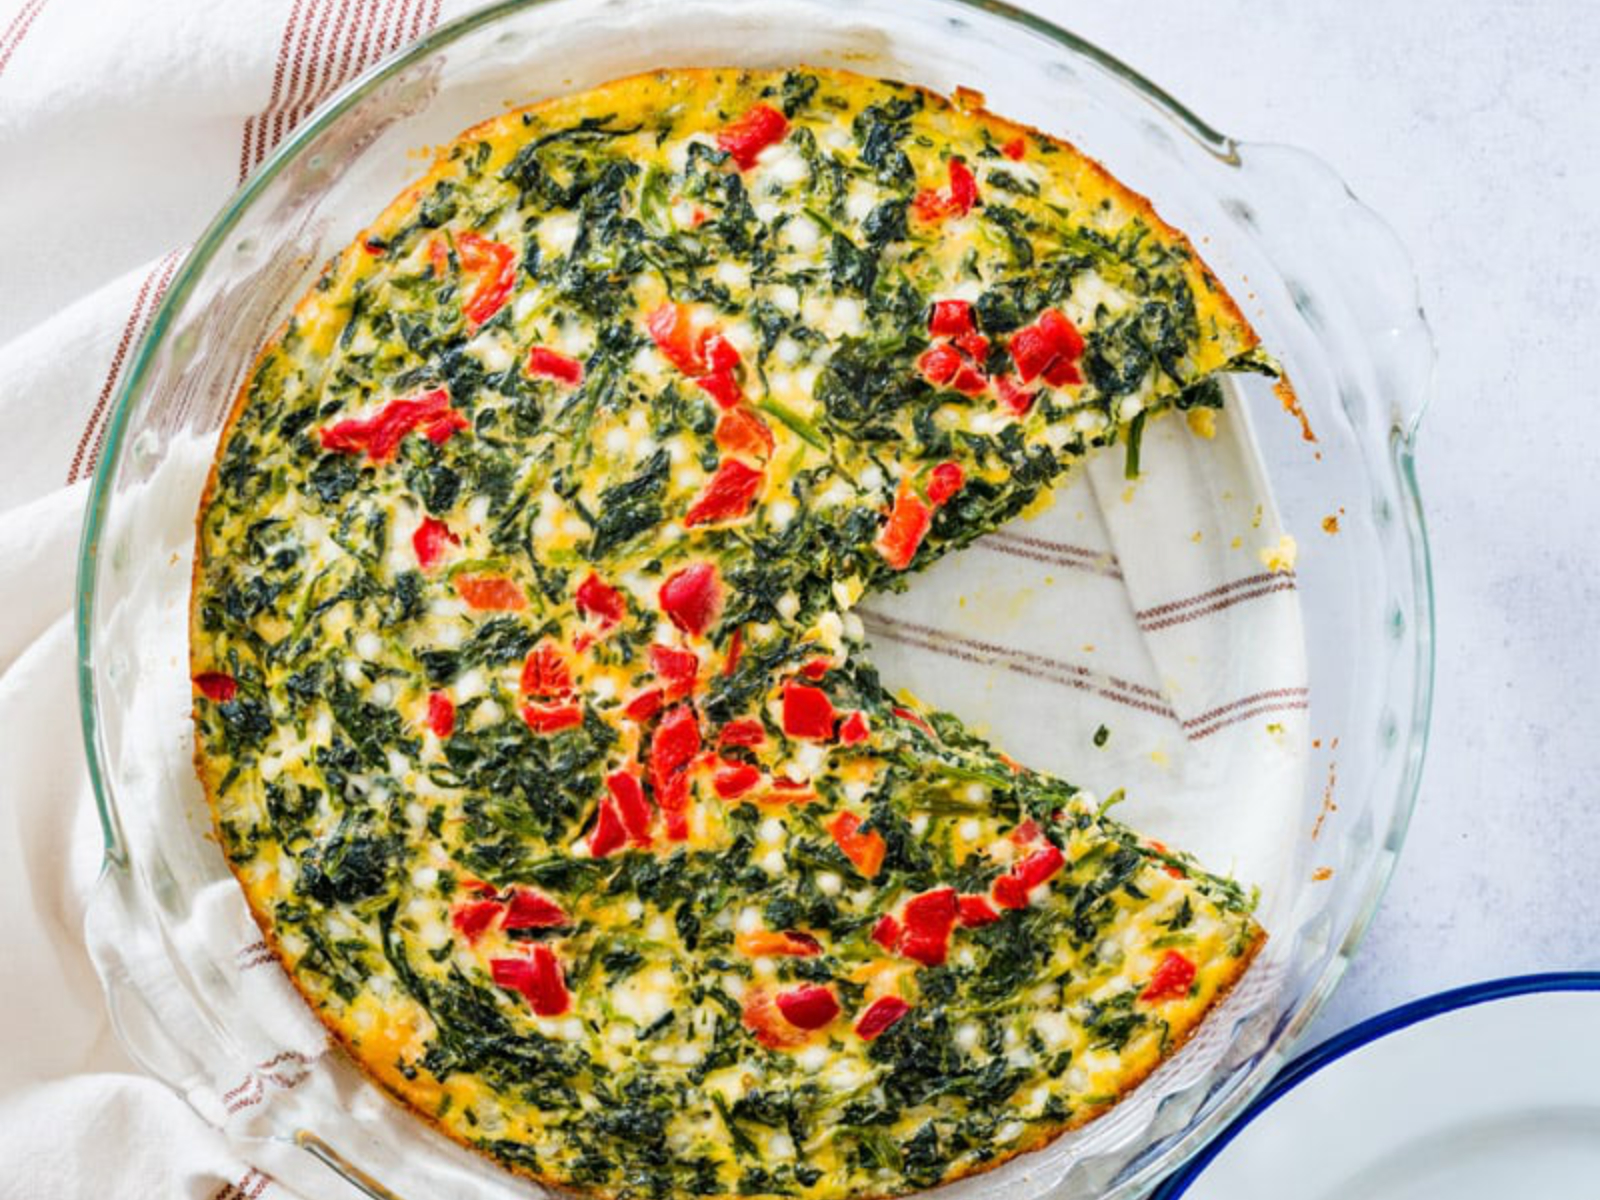 Crustless Quiche with Spinach